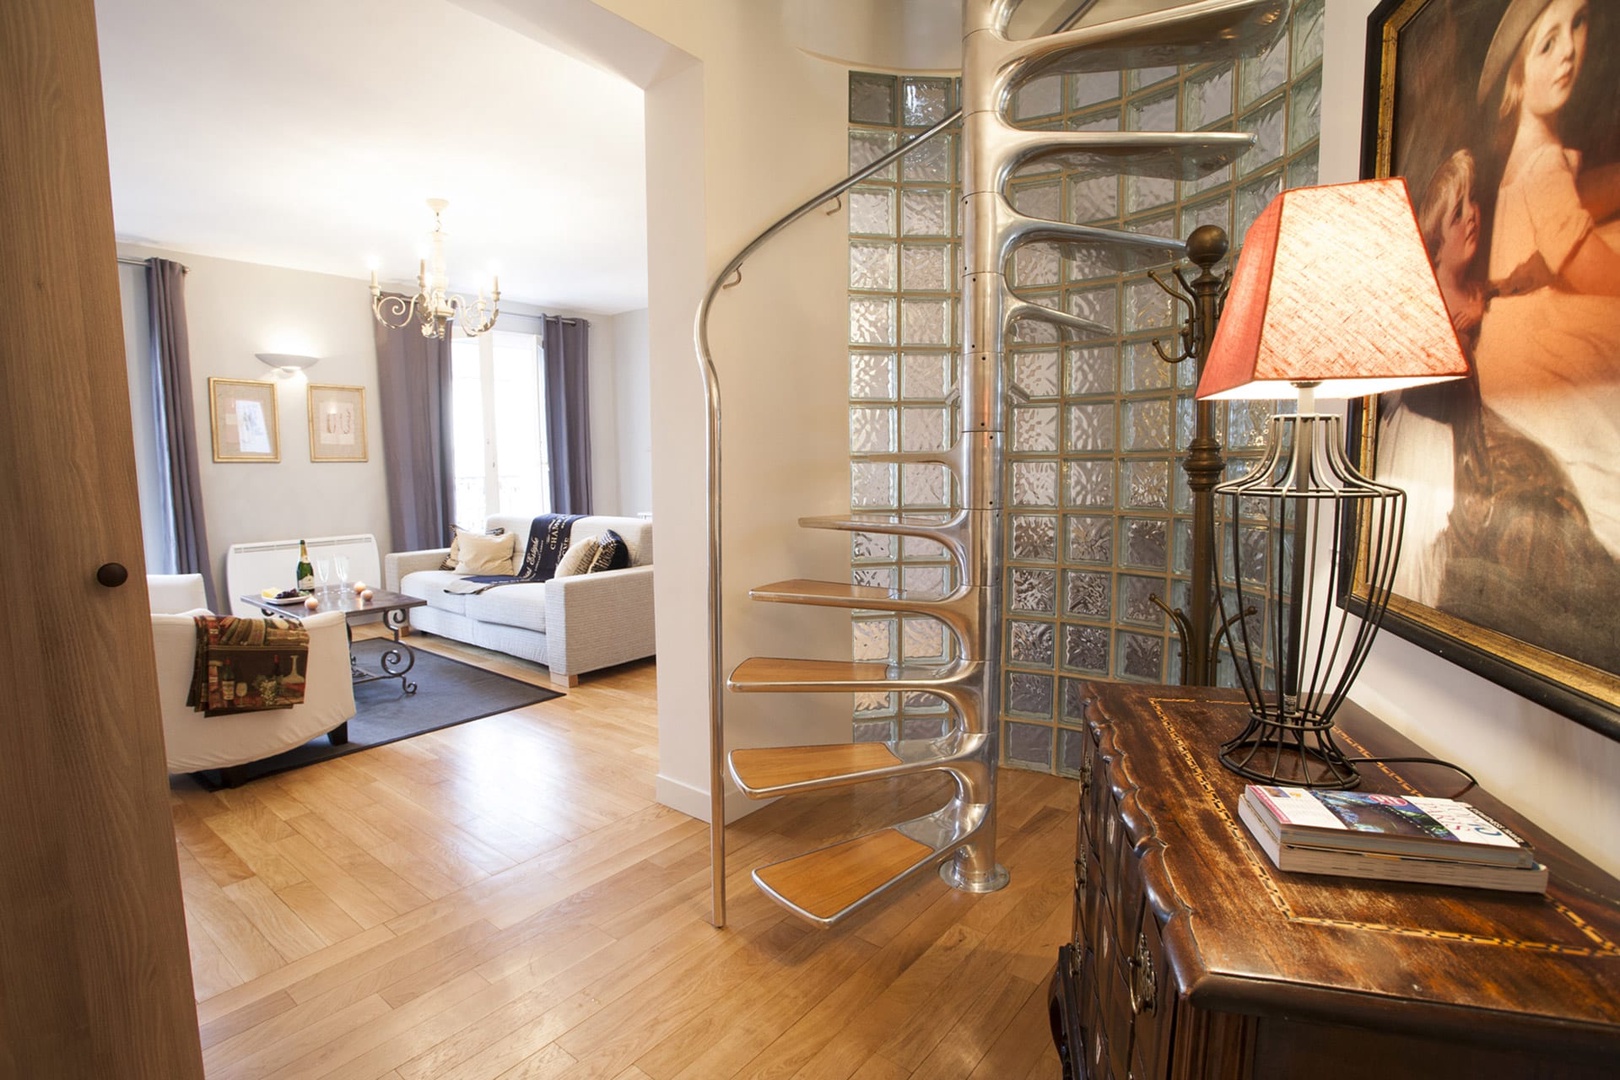 The spiral staircase adds even more flair to the beautiful apartment!